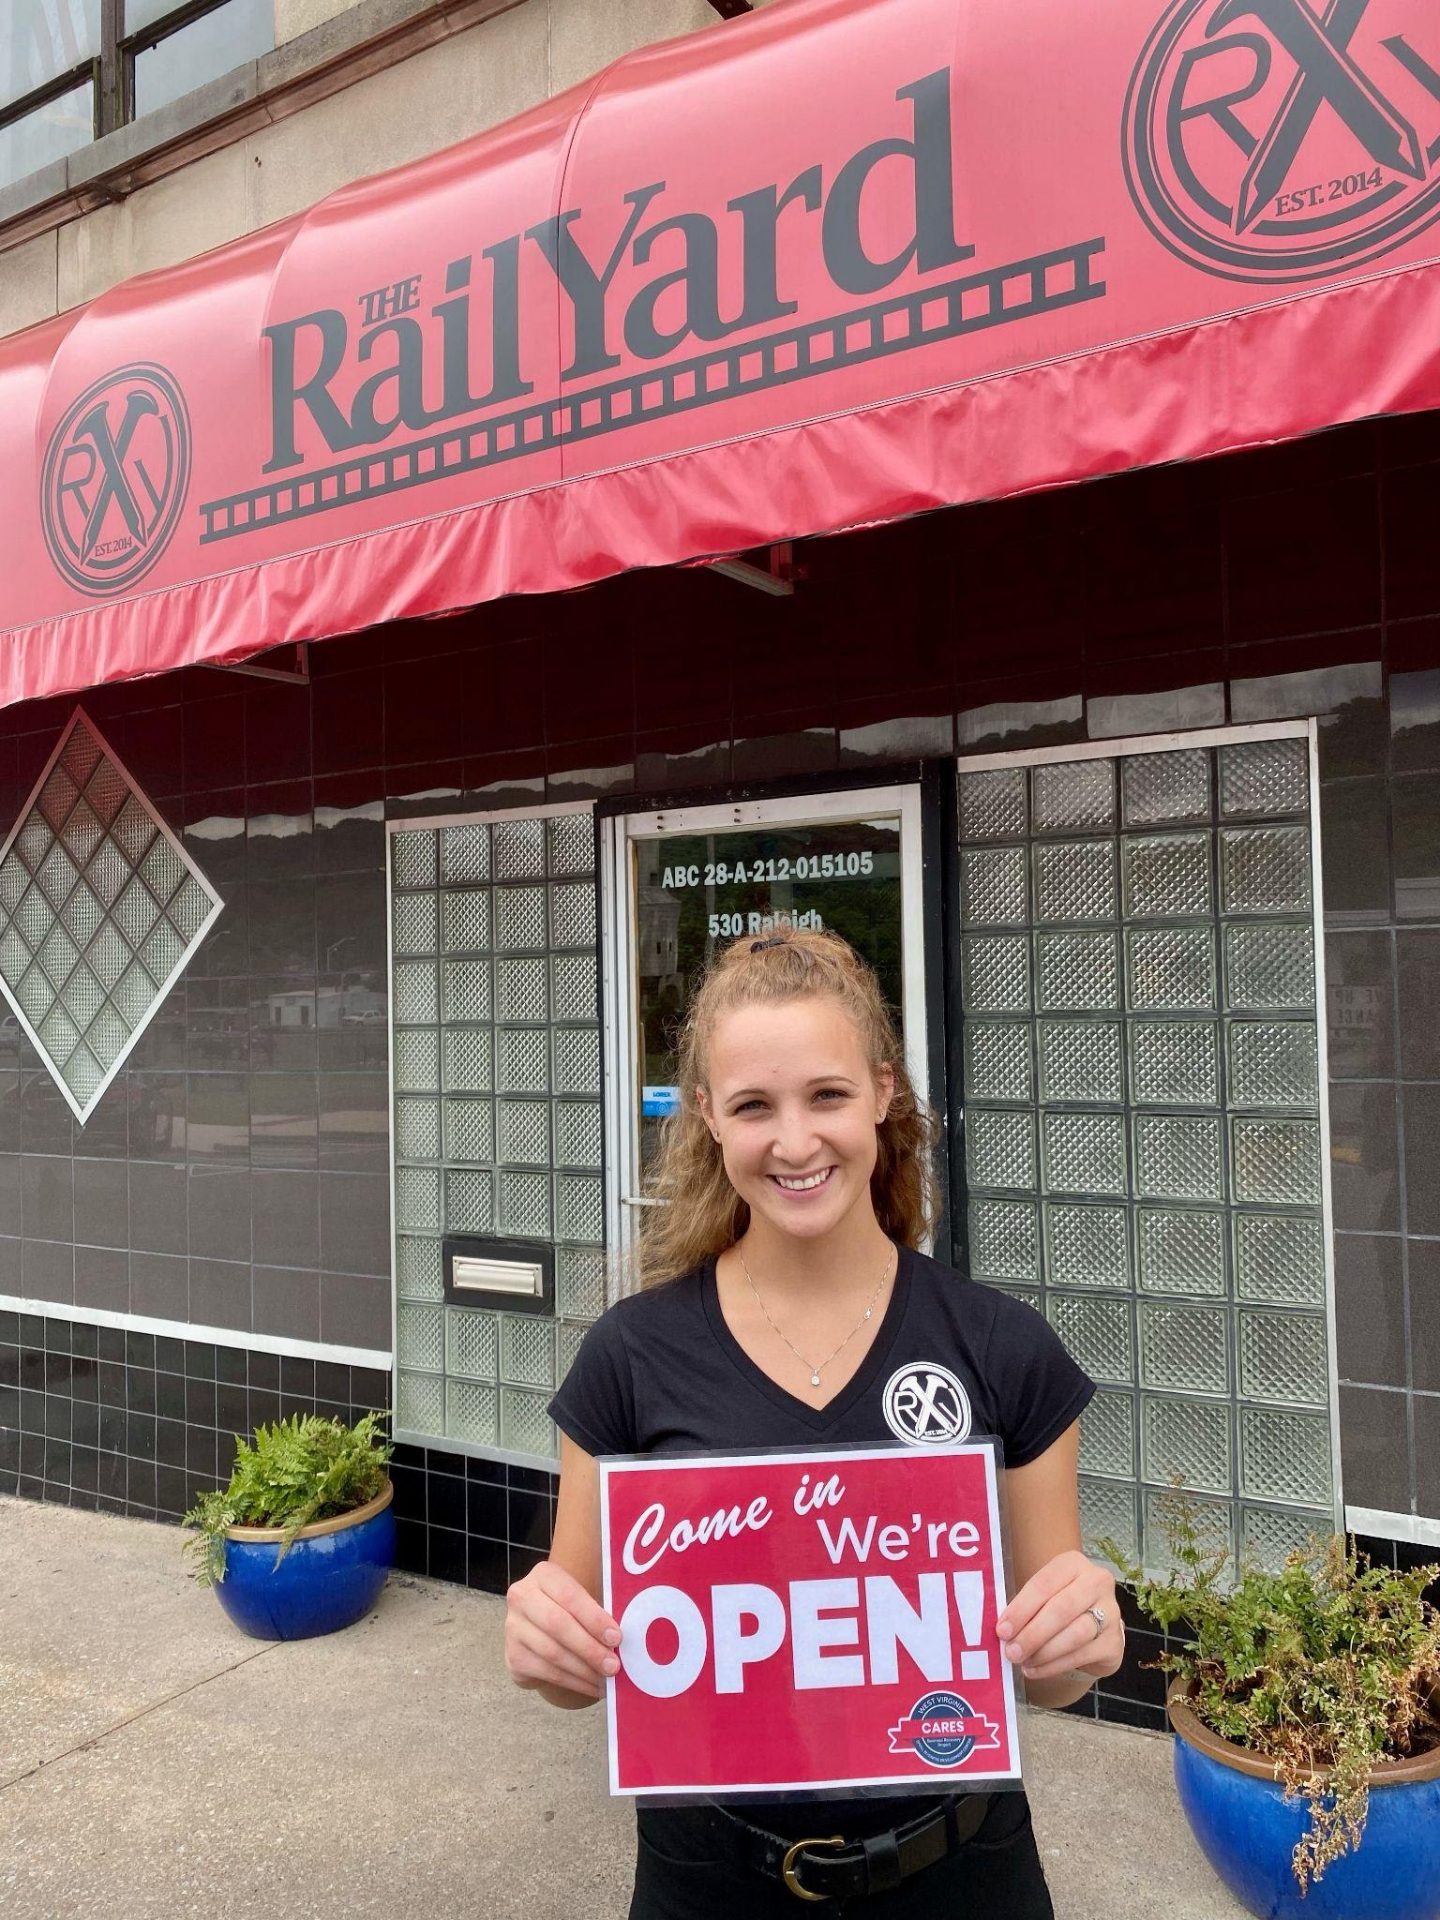 The RailYard: Come in. We’re open!